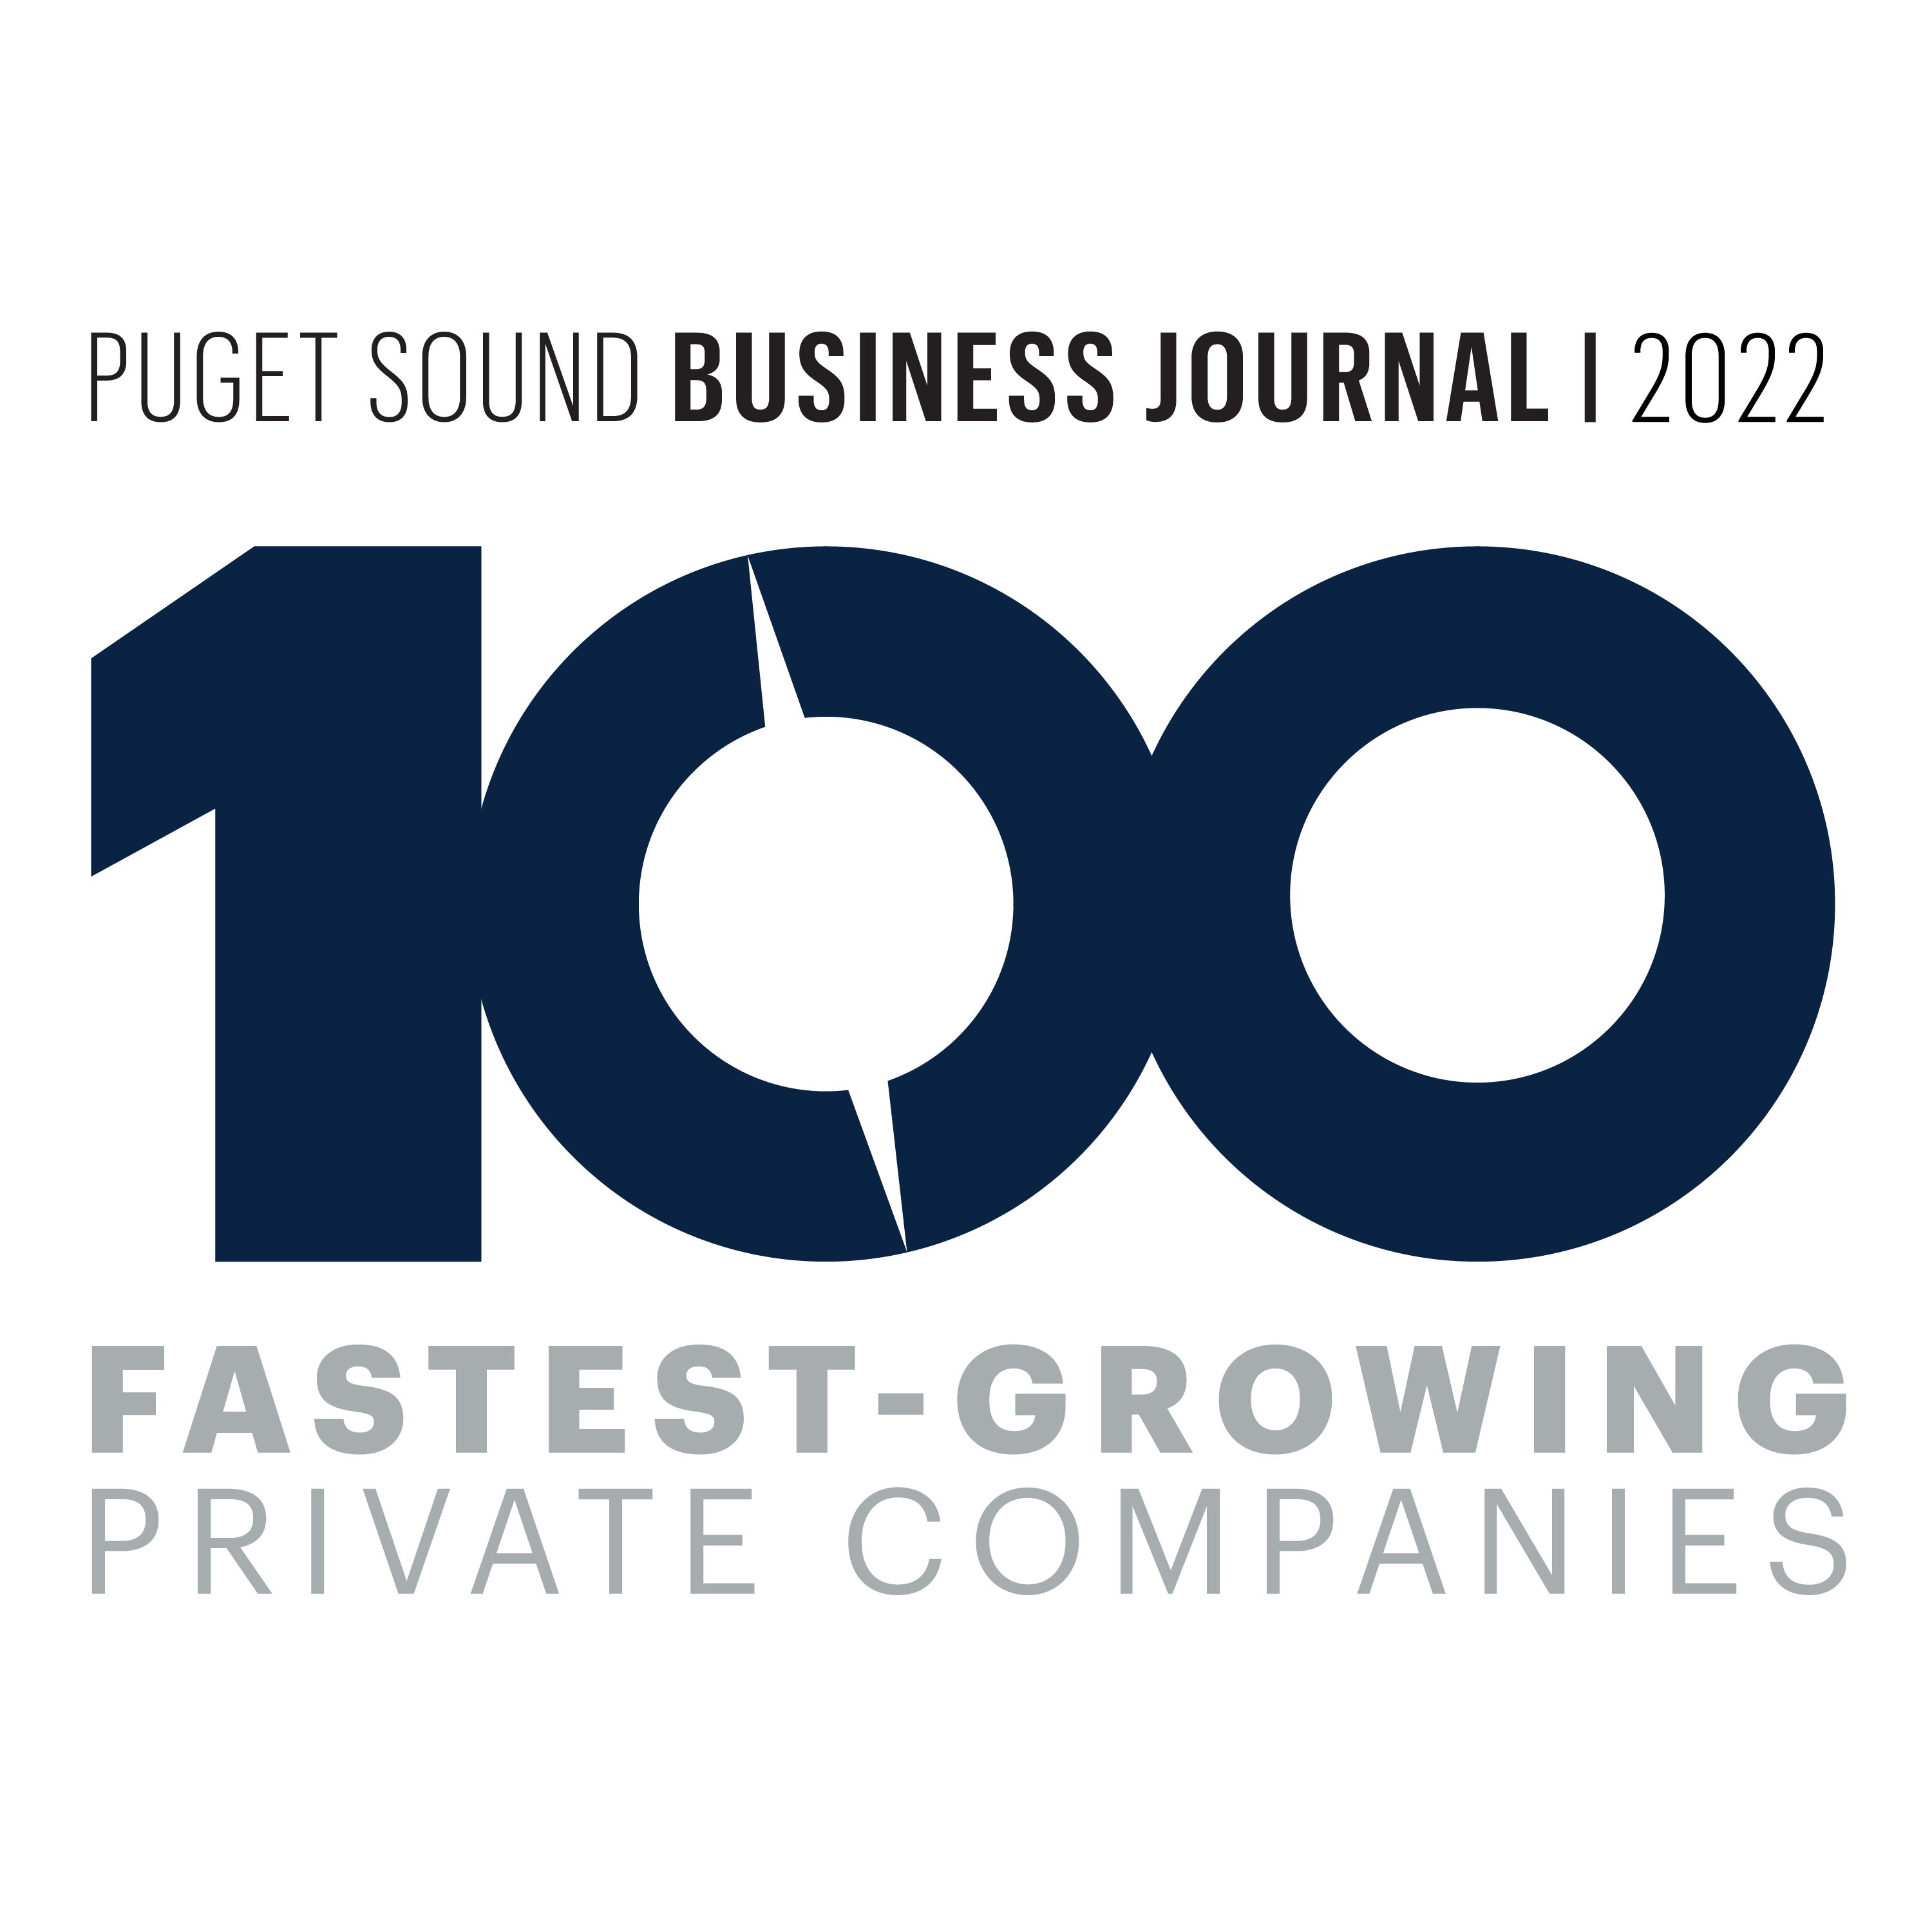 Puget Sound Business Journal Fastest Growing Private Companies